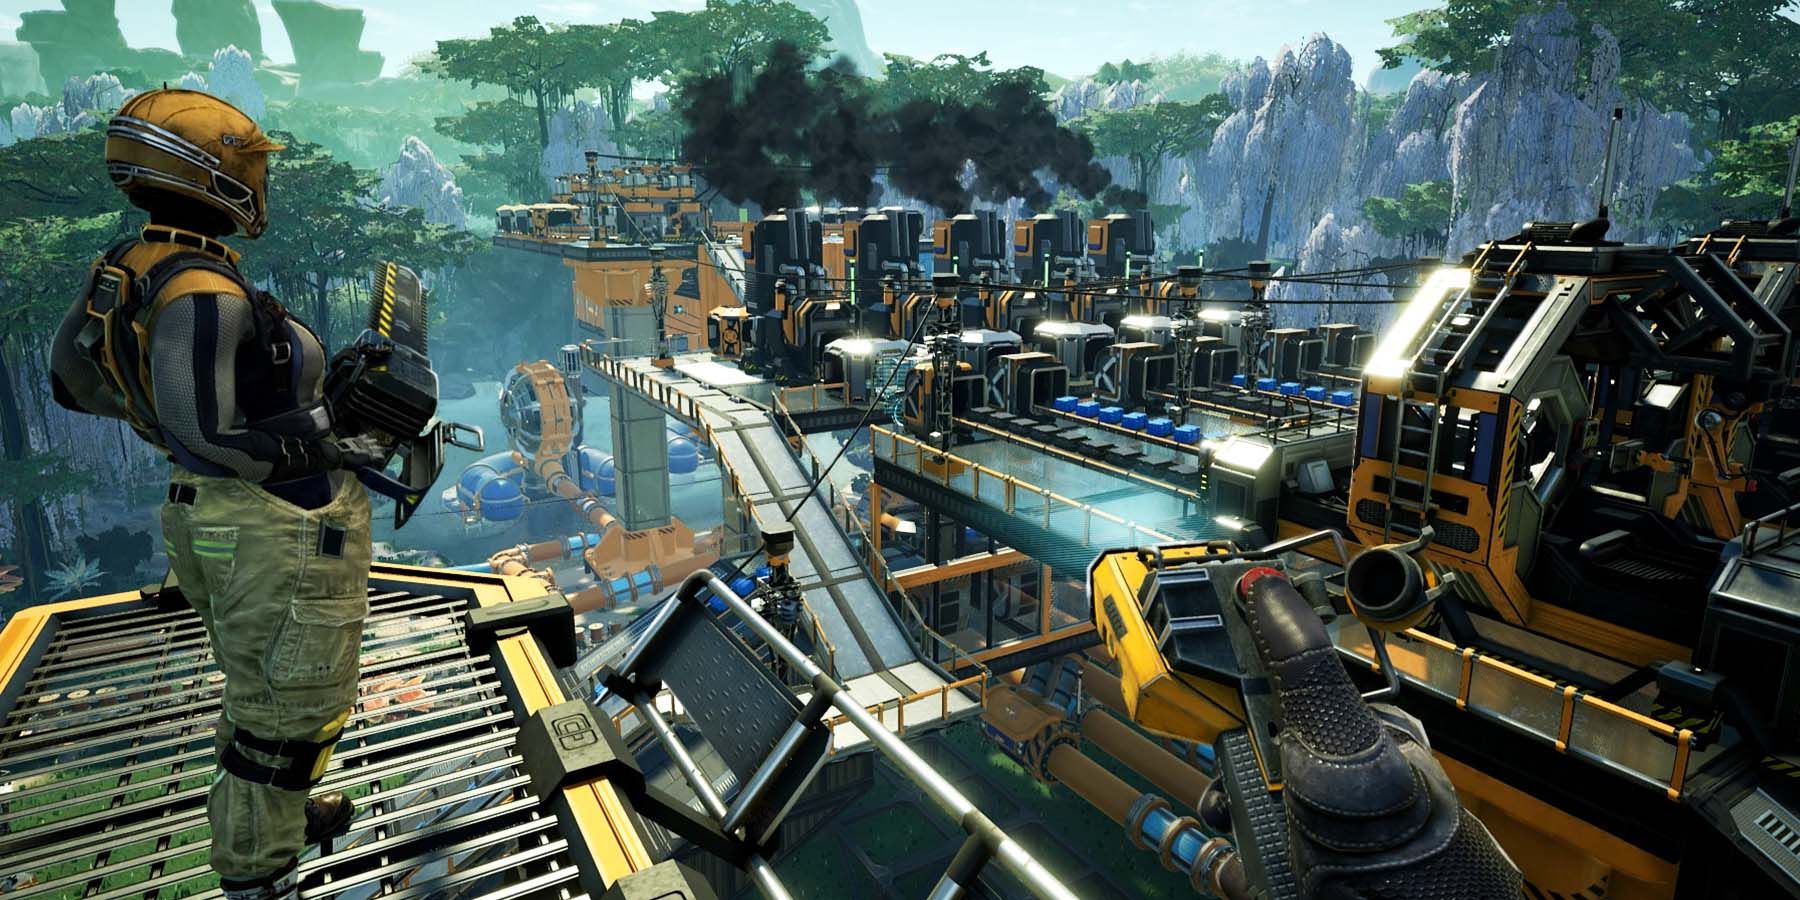 Satisfactory Player Looking at a Factory